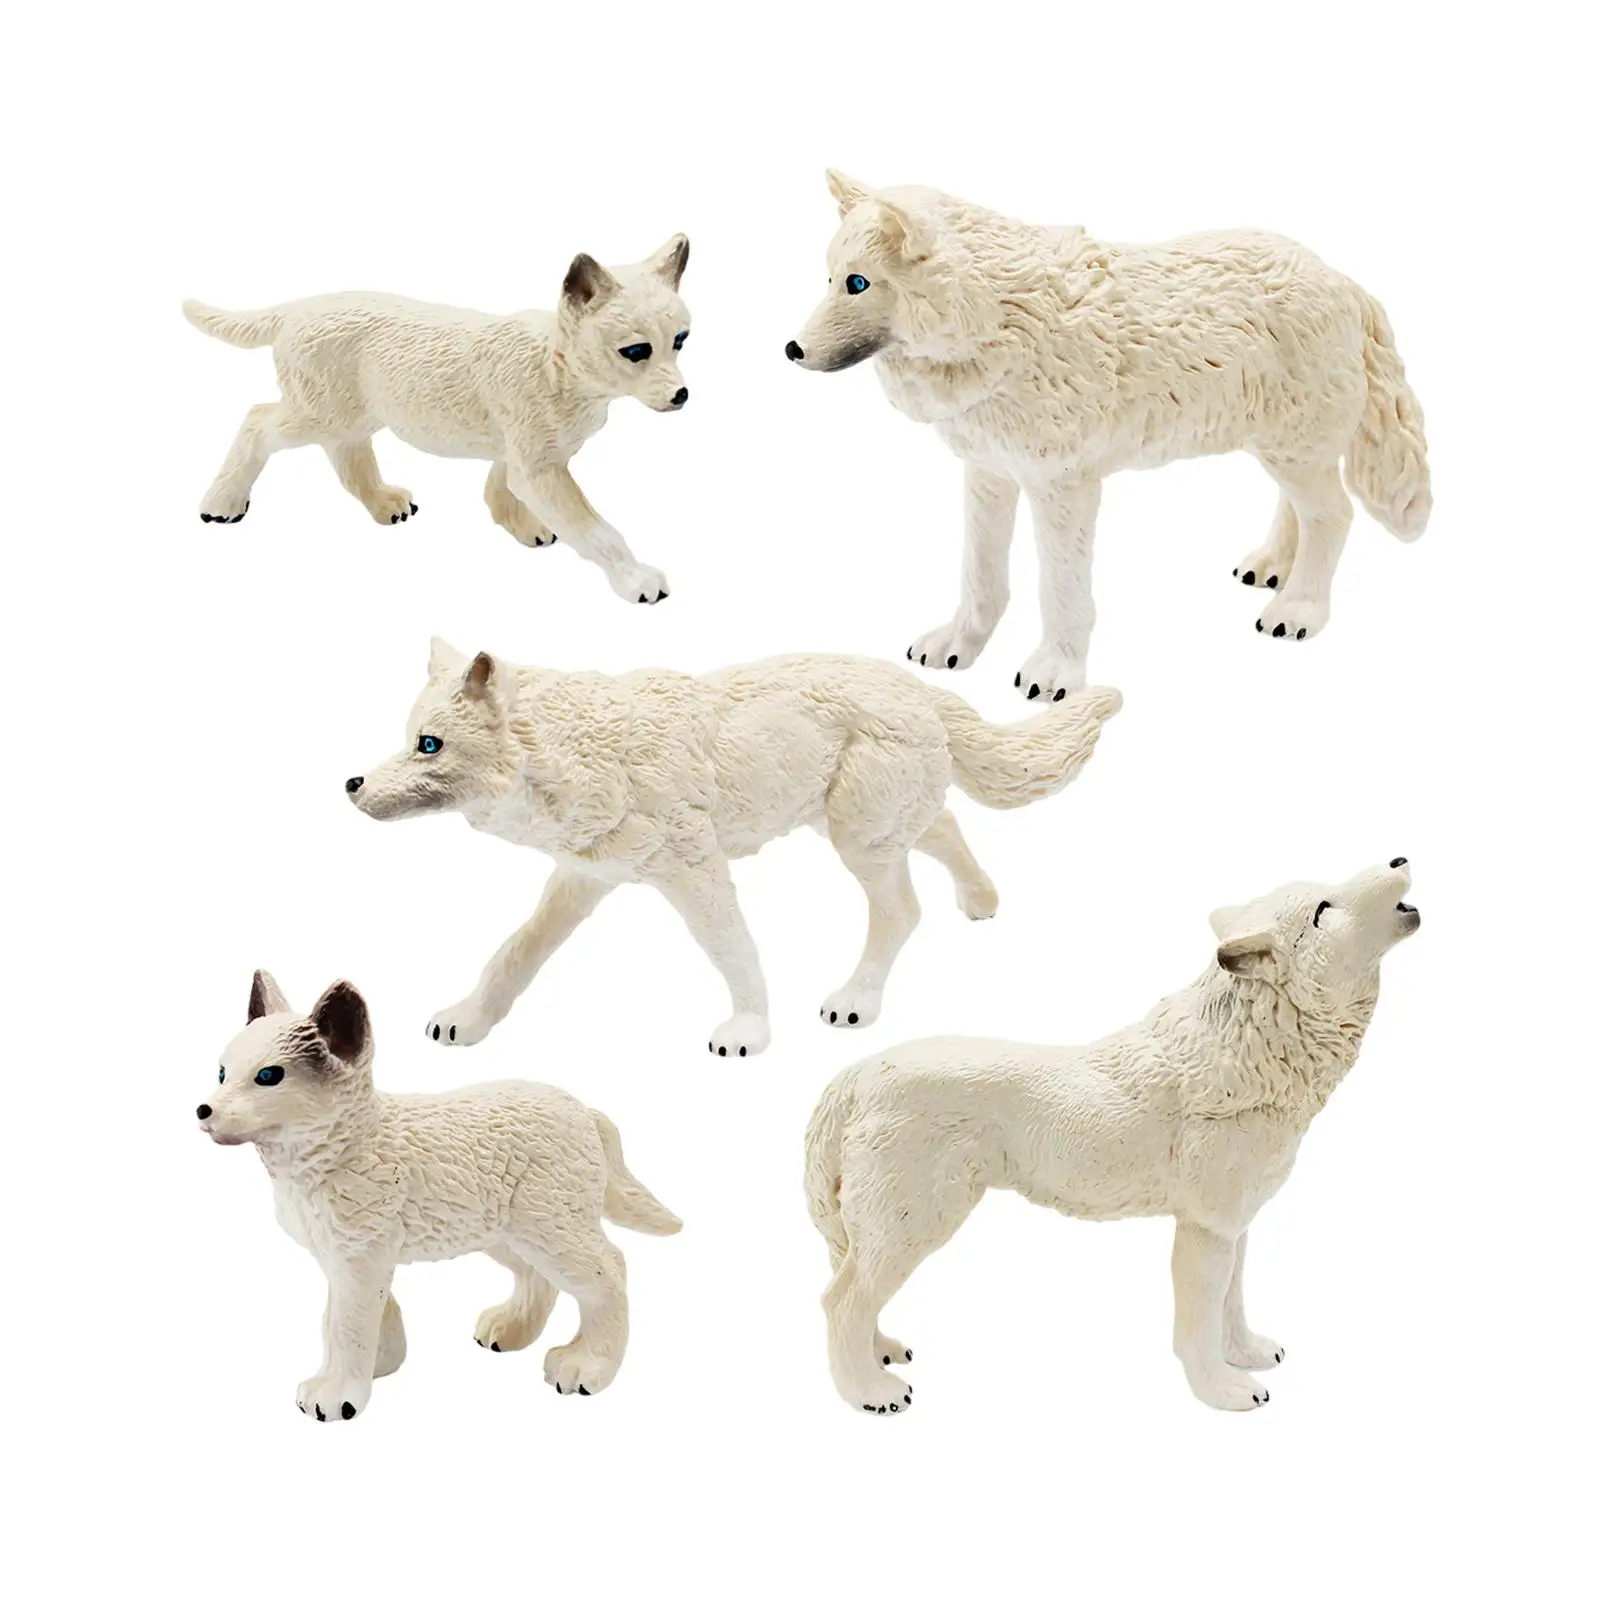 5 Pieces Wolf Figurines Wolf Playset Model for Desktop Decor Birthday Gifts